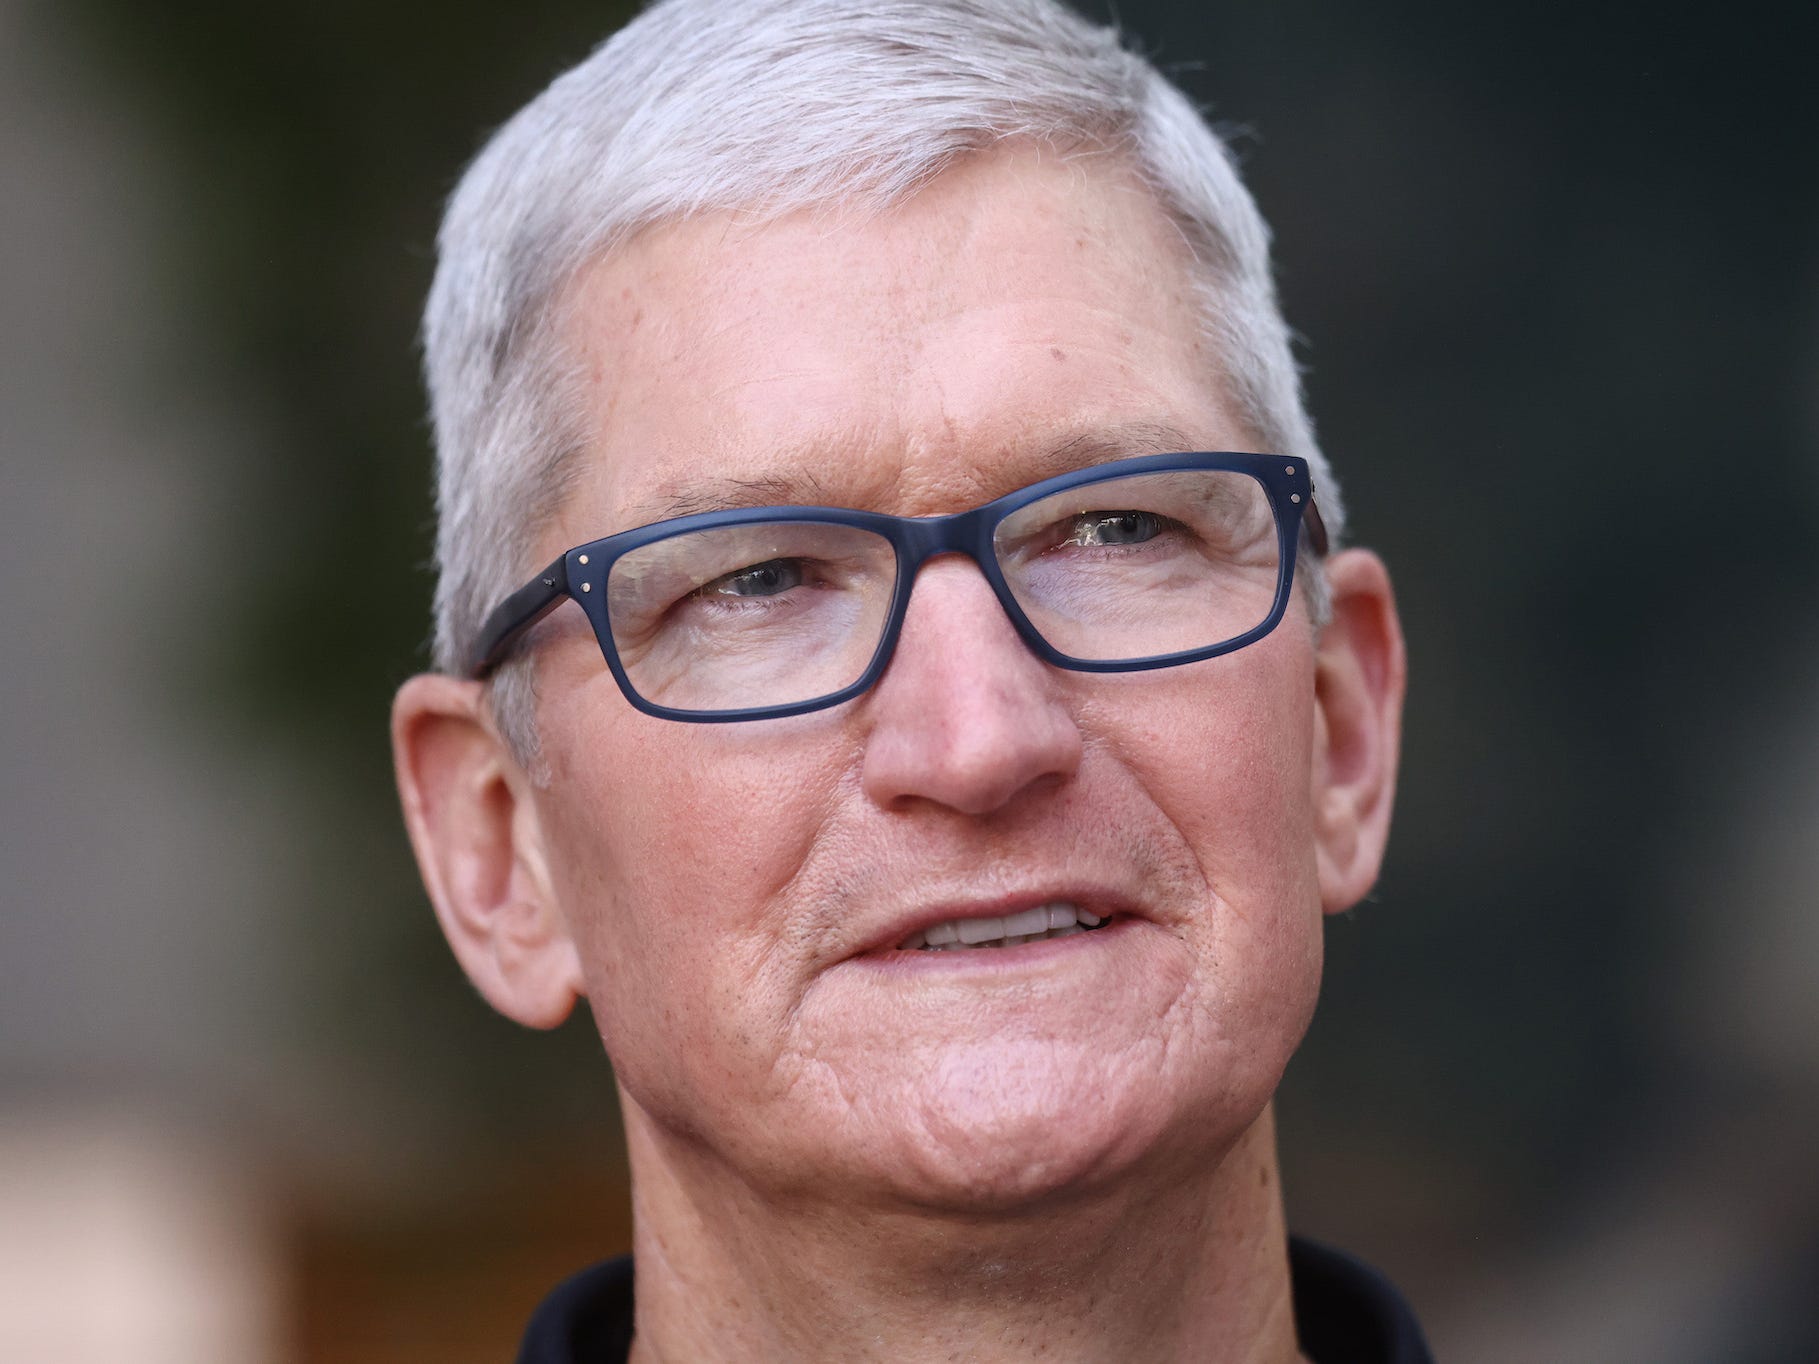 A headshot of Apple CEO Tim Cook